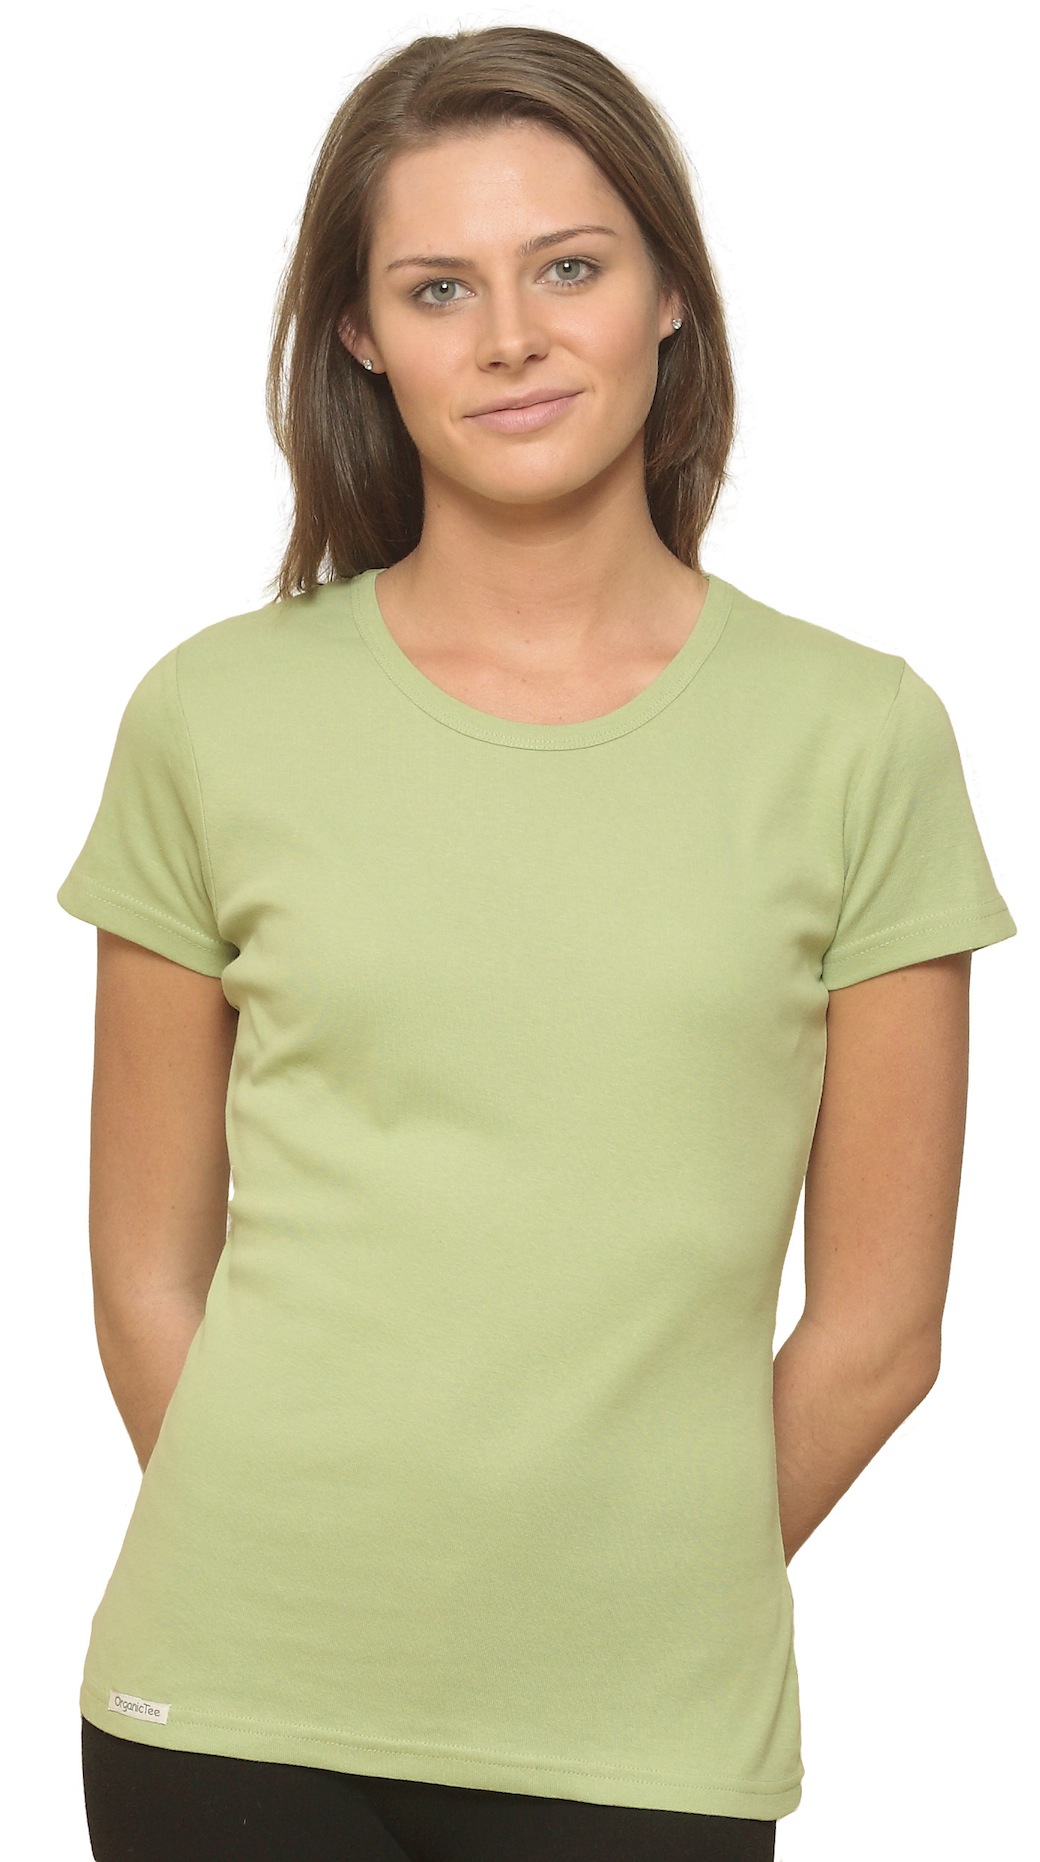 Wholesale Organic Tees: Certified Fair Trade Organic Cotton Products ...